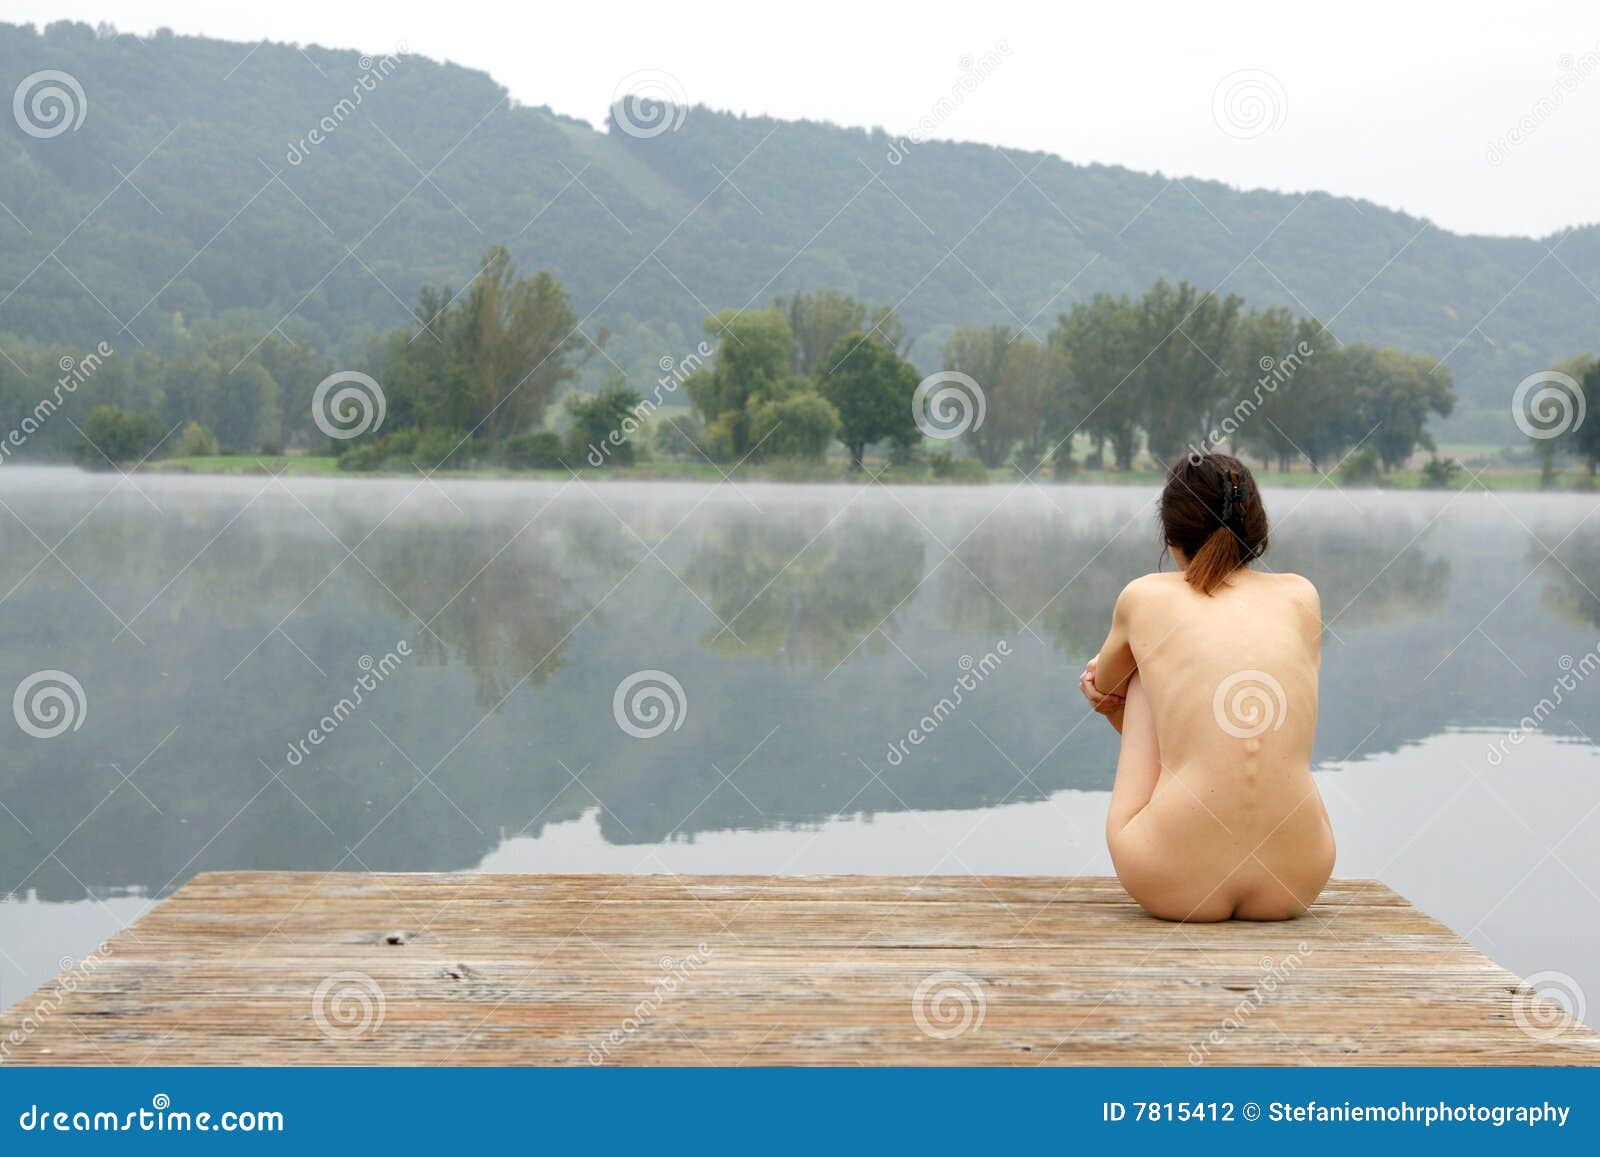 Nude by the lake